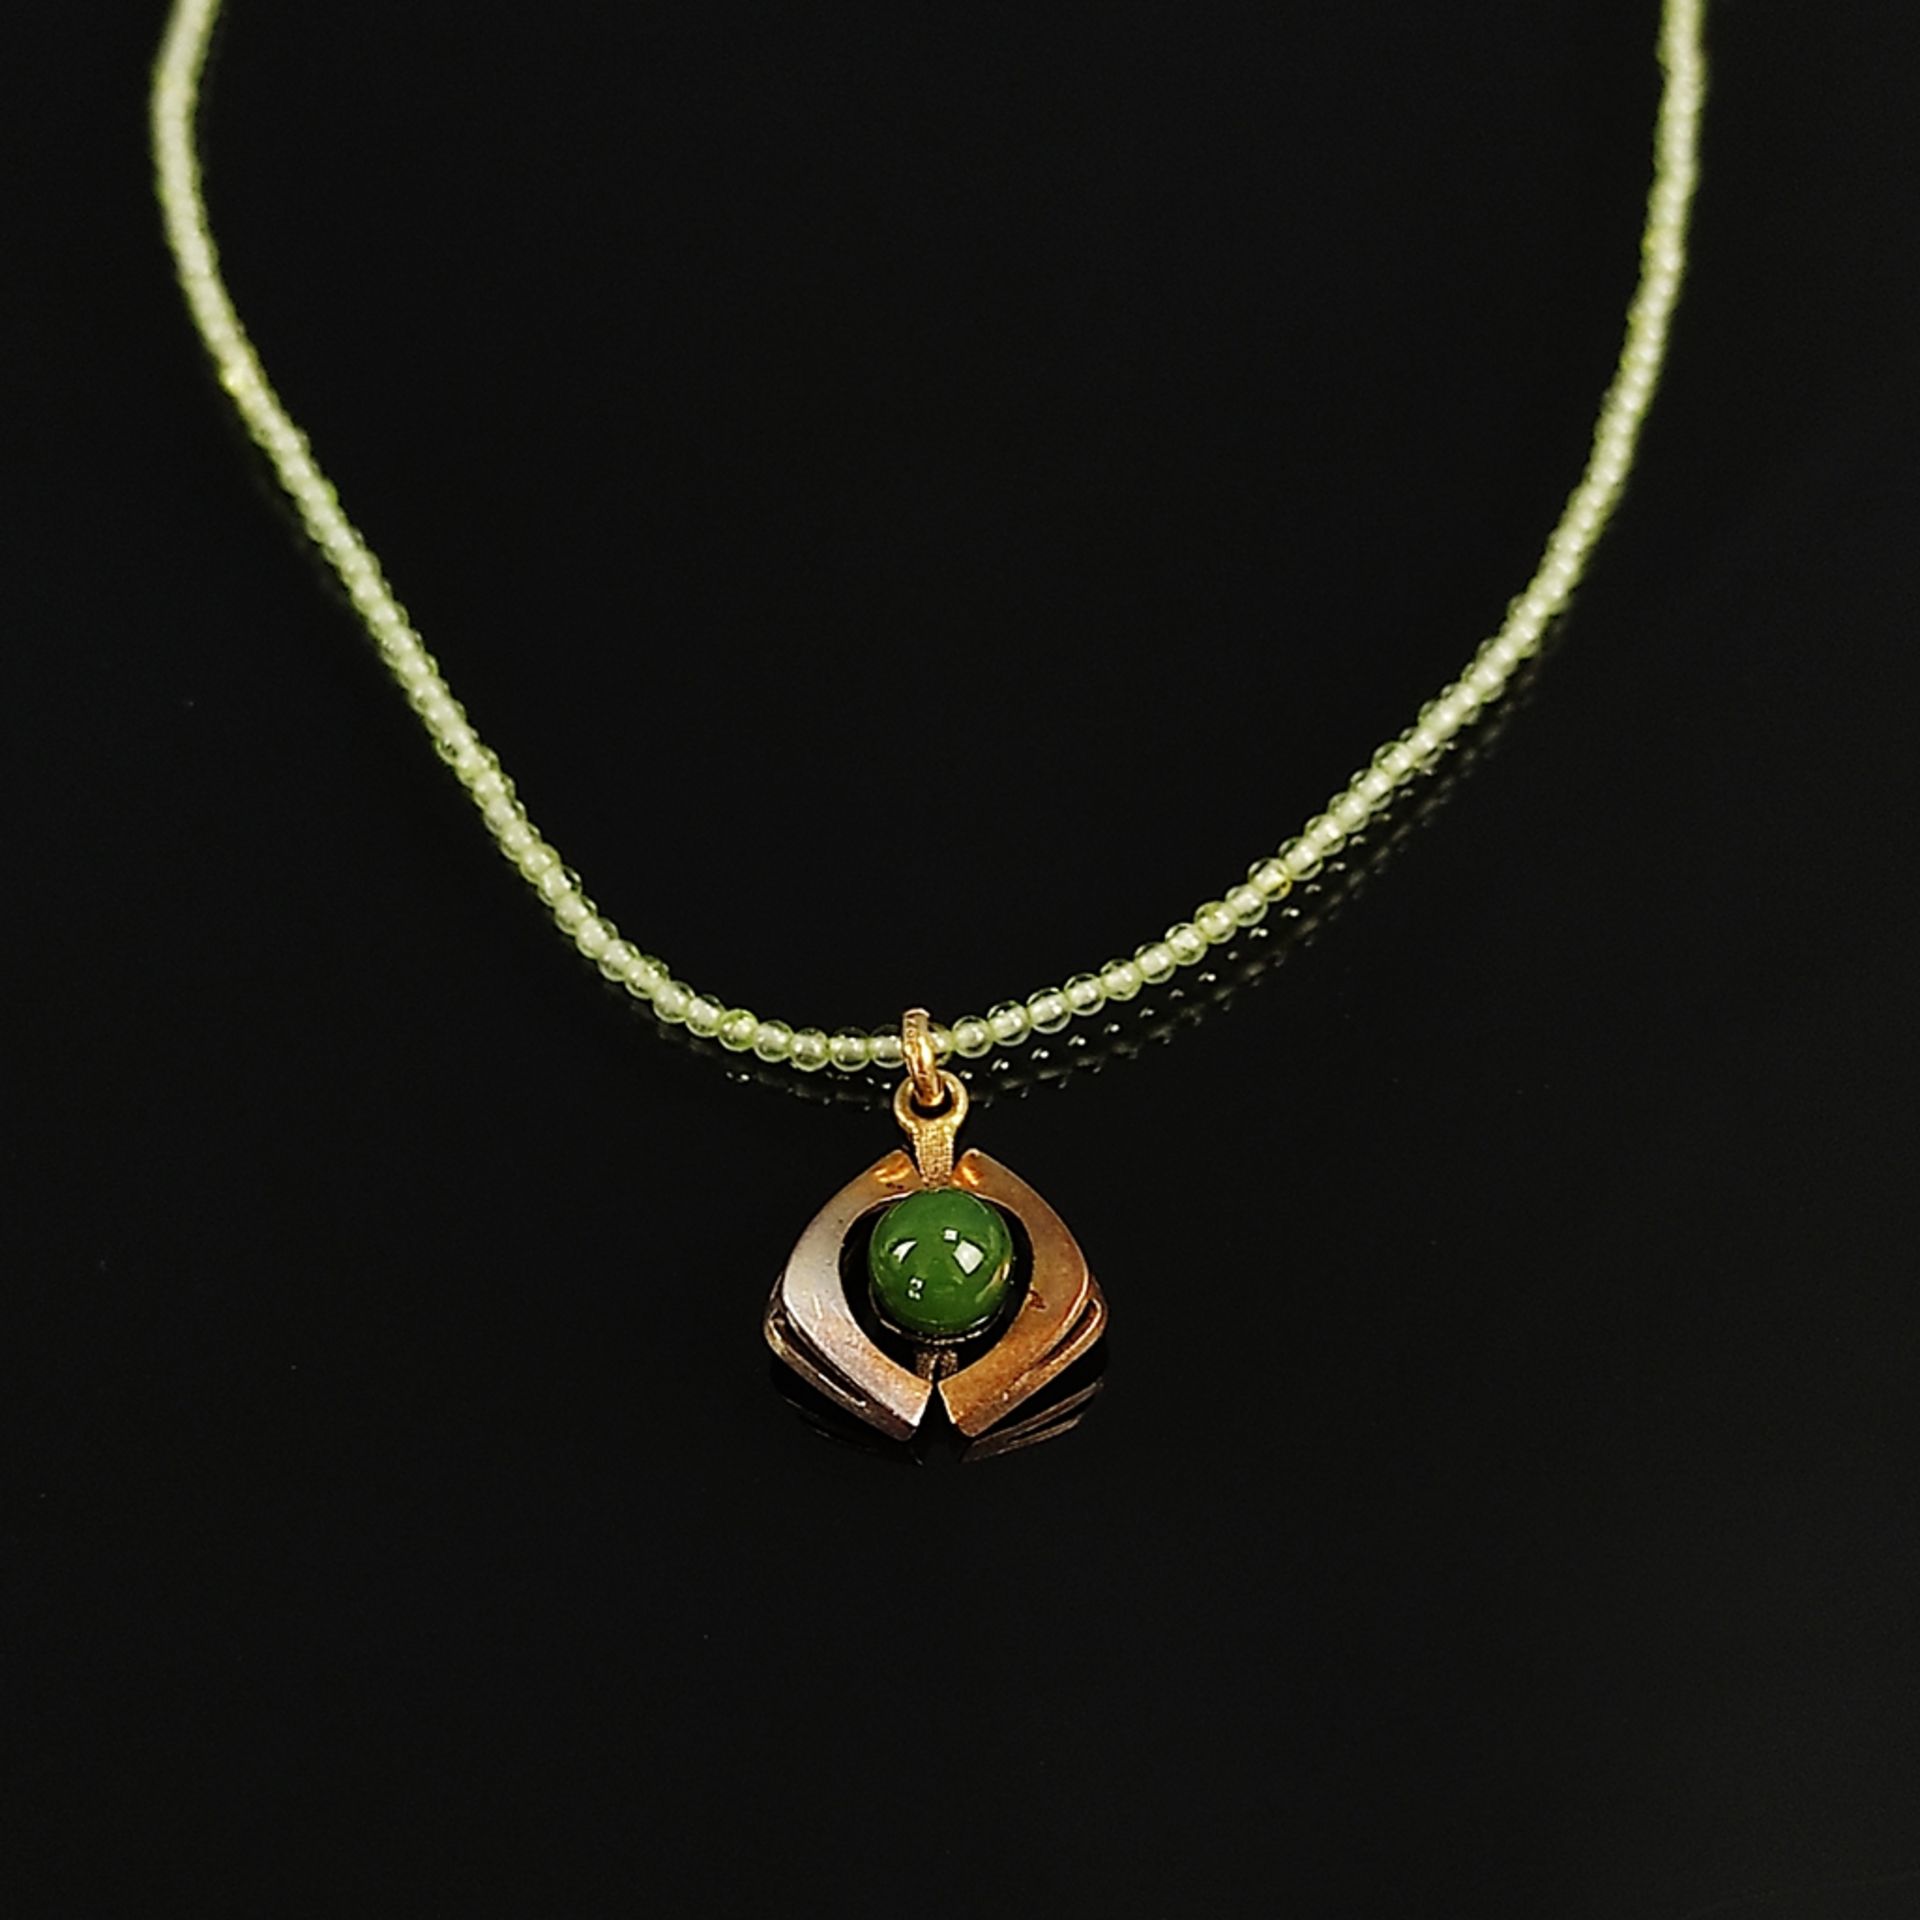 Jade pendant on peridot chain, 333/8K yellow gold, total weight 5,10g, pendant set with a fine poli